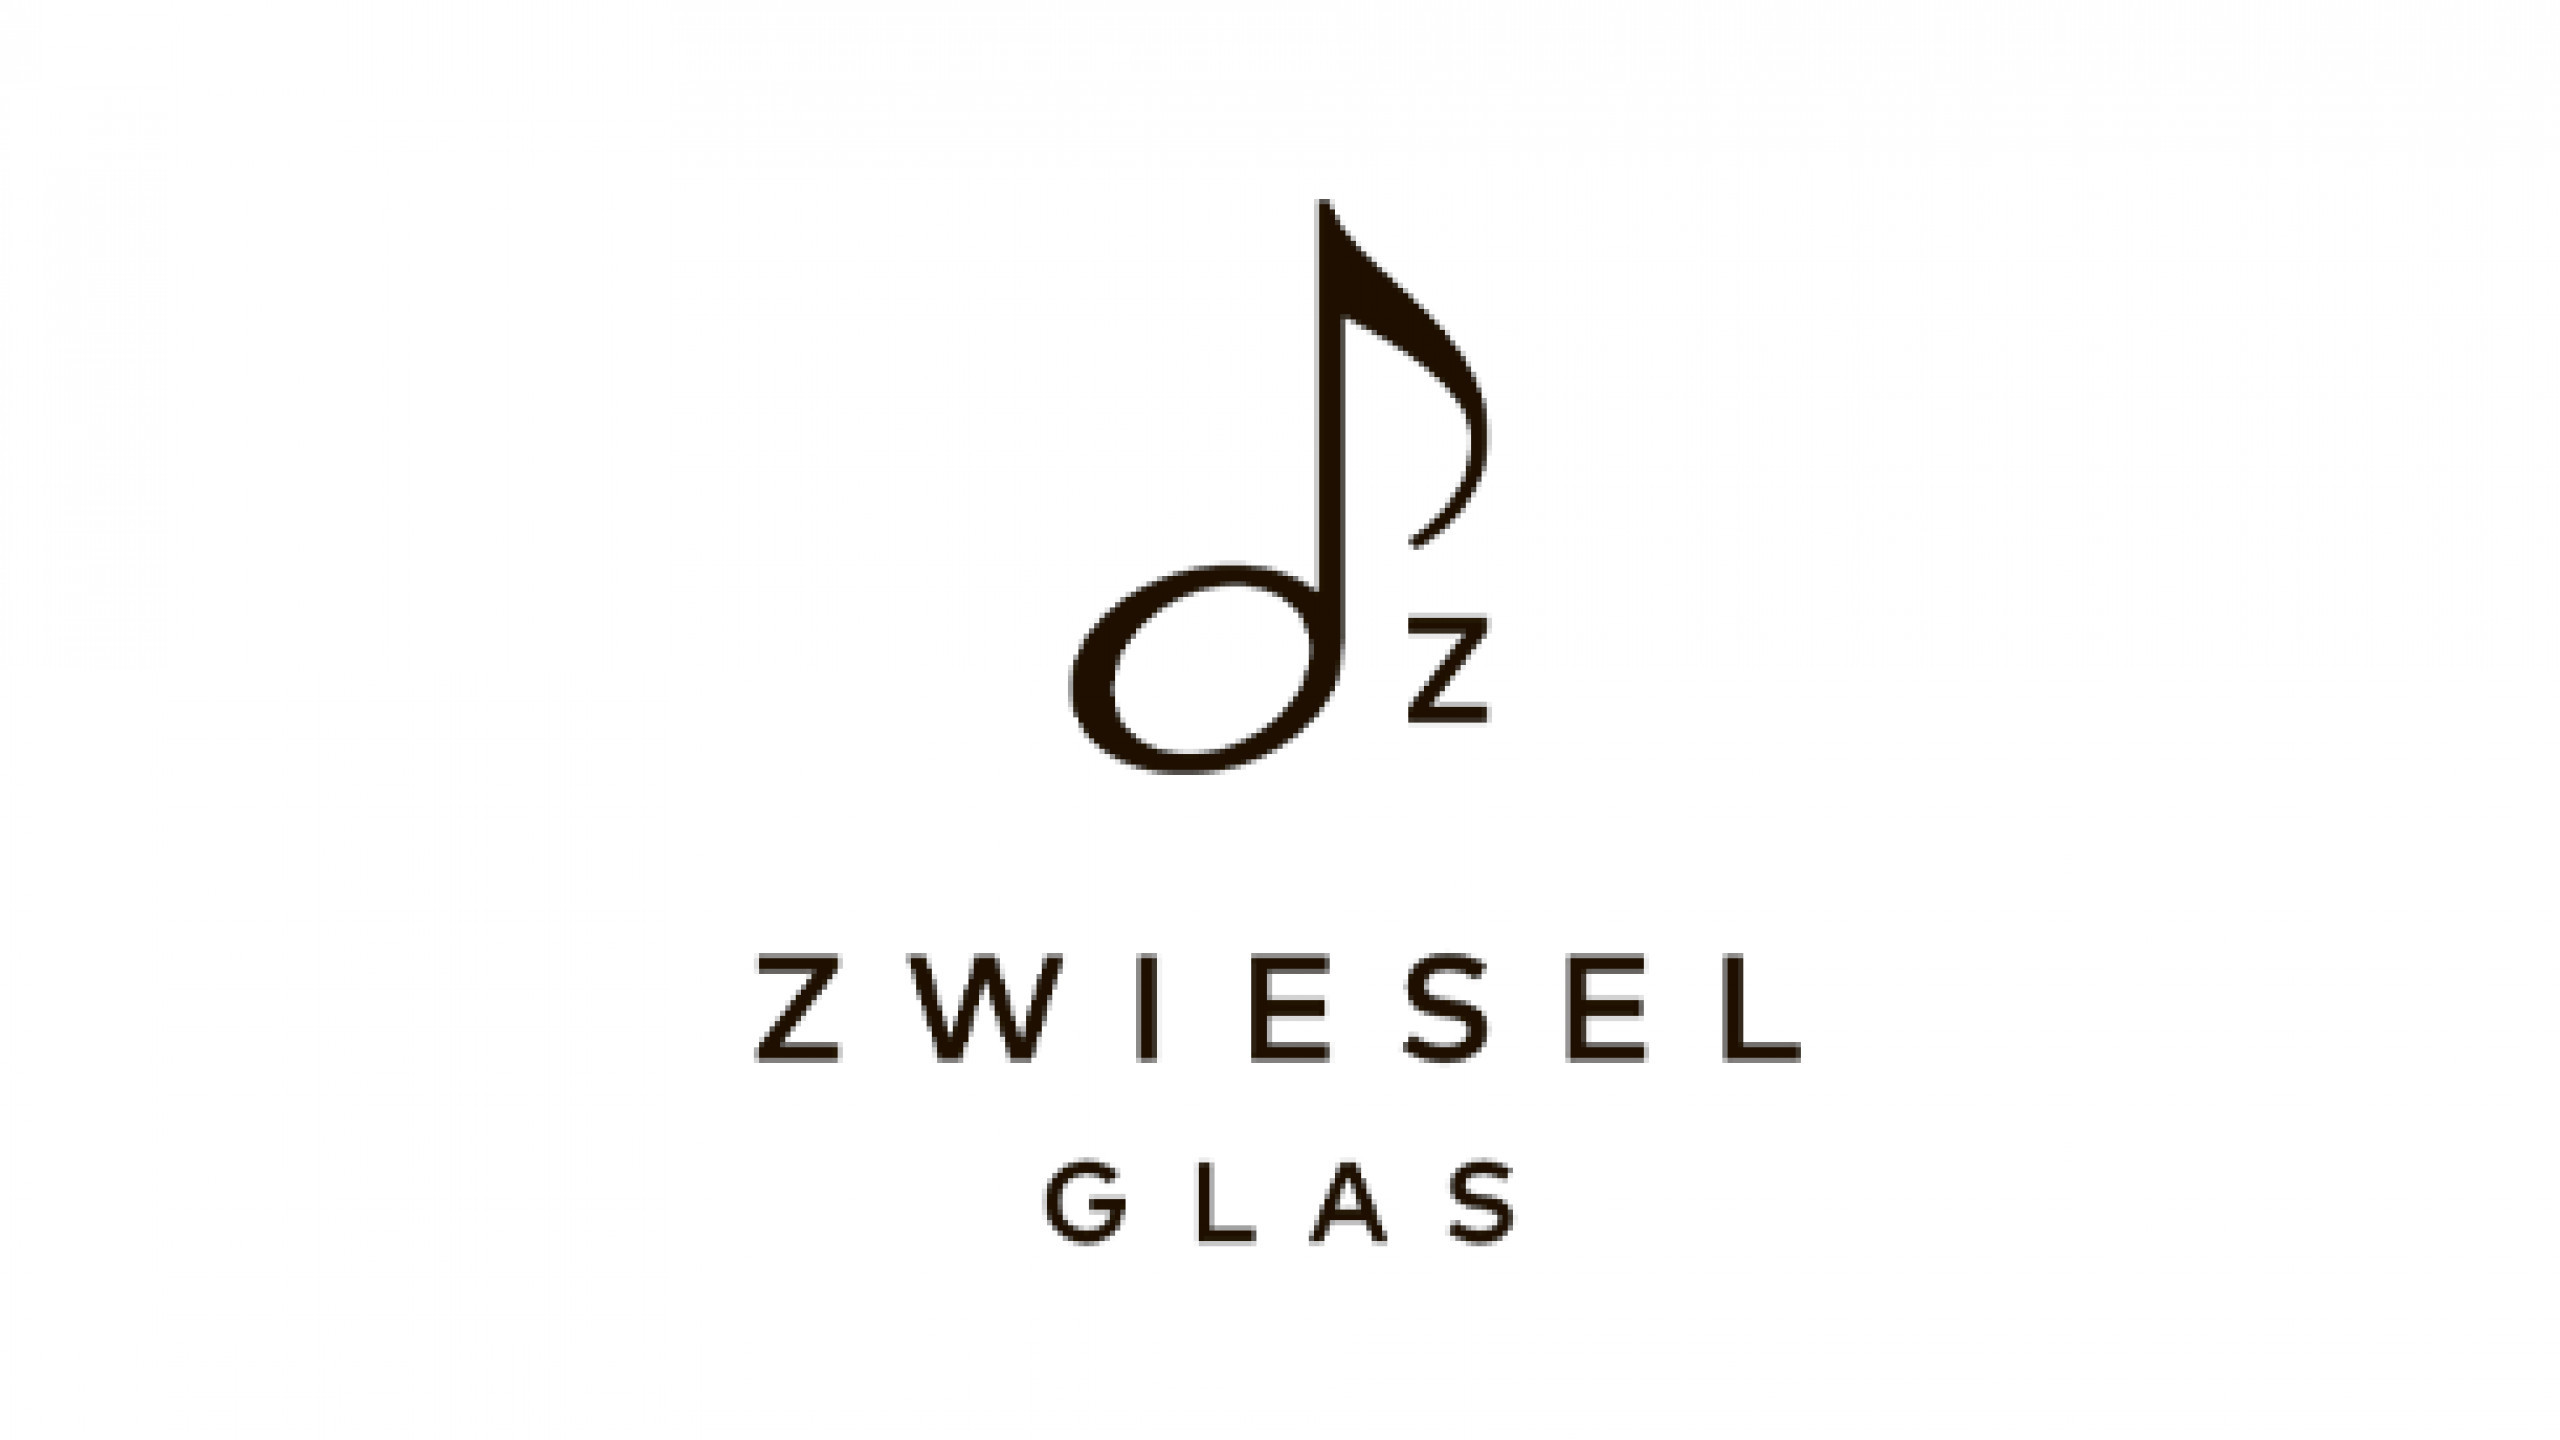 ZWIESEL GLAS HAND MADE